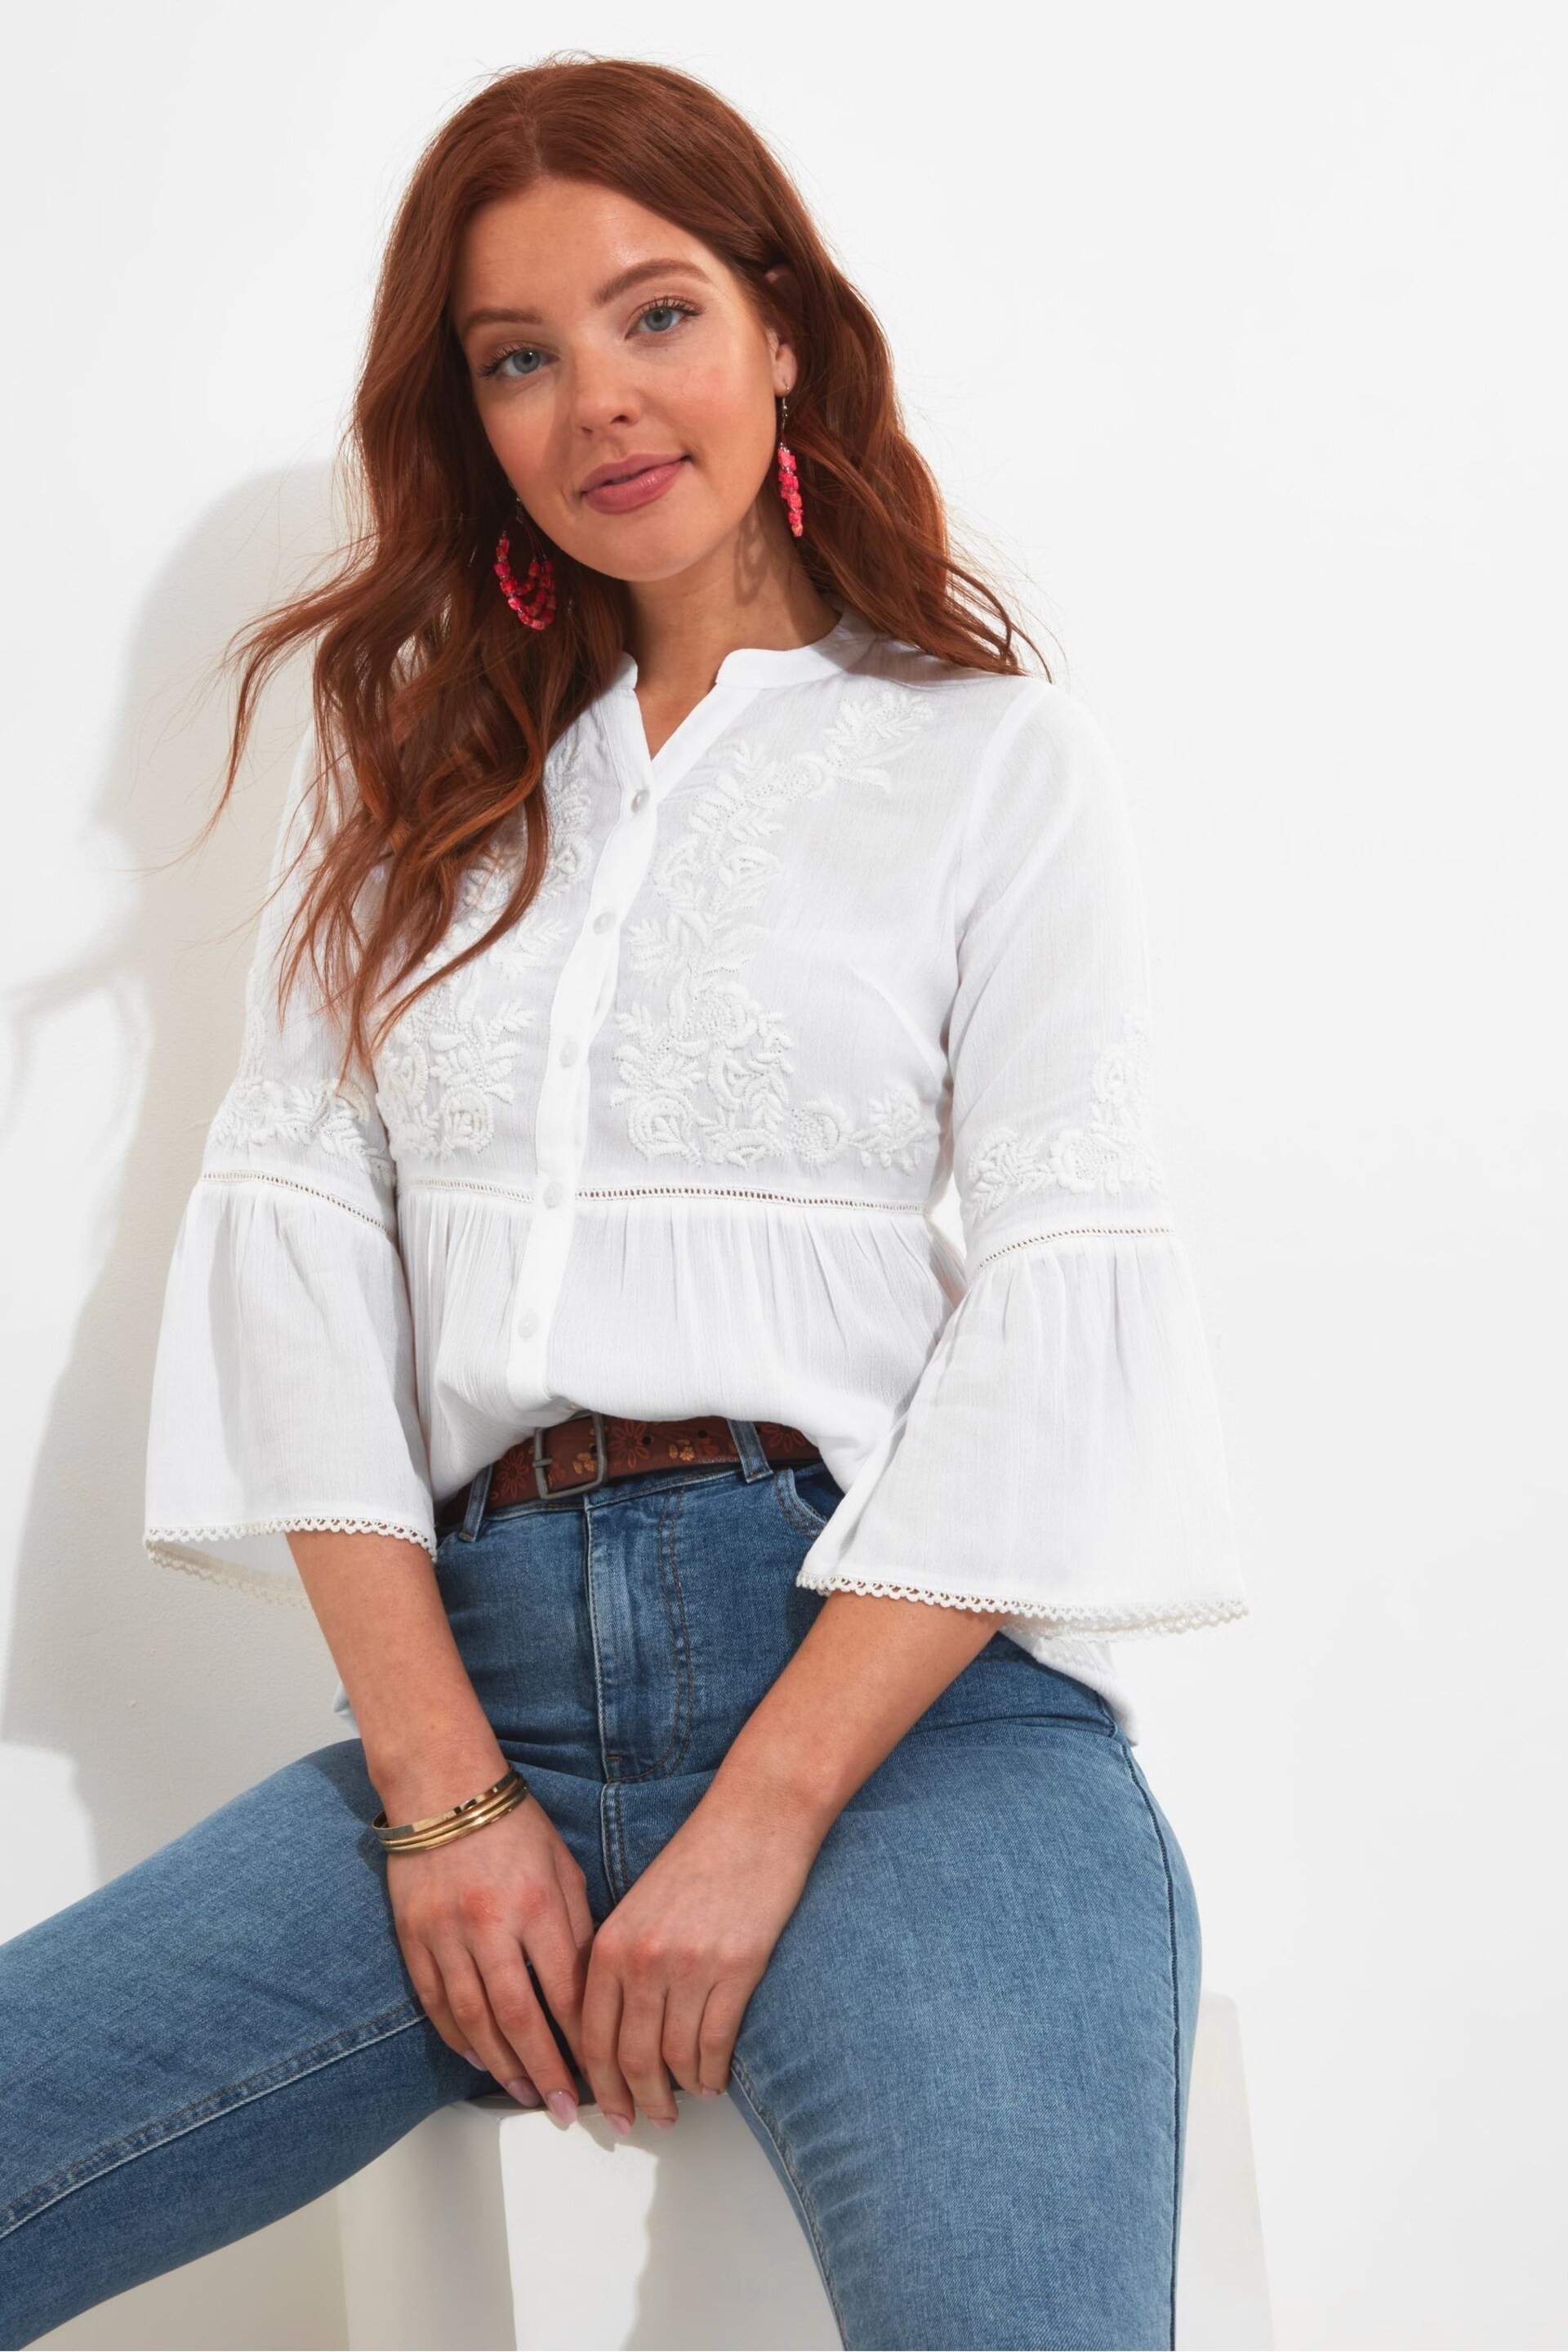 Joe Browns White Embroidered Button Down Collarless Blouse - Image 1 of 6